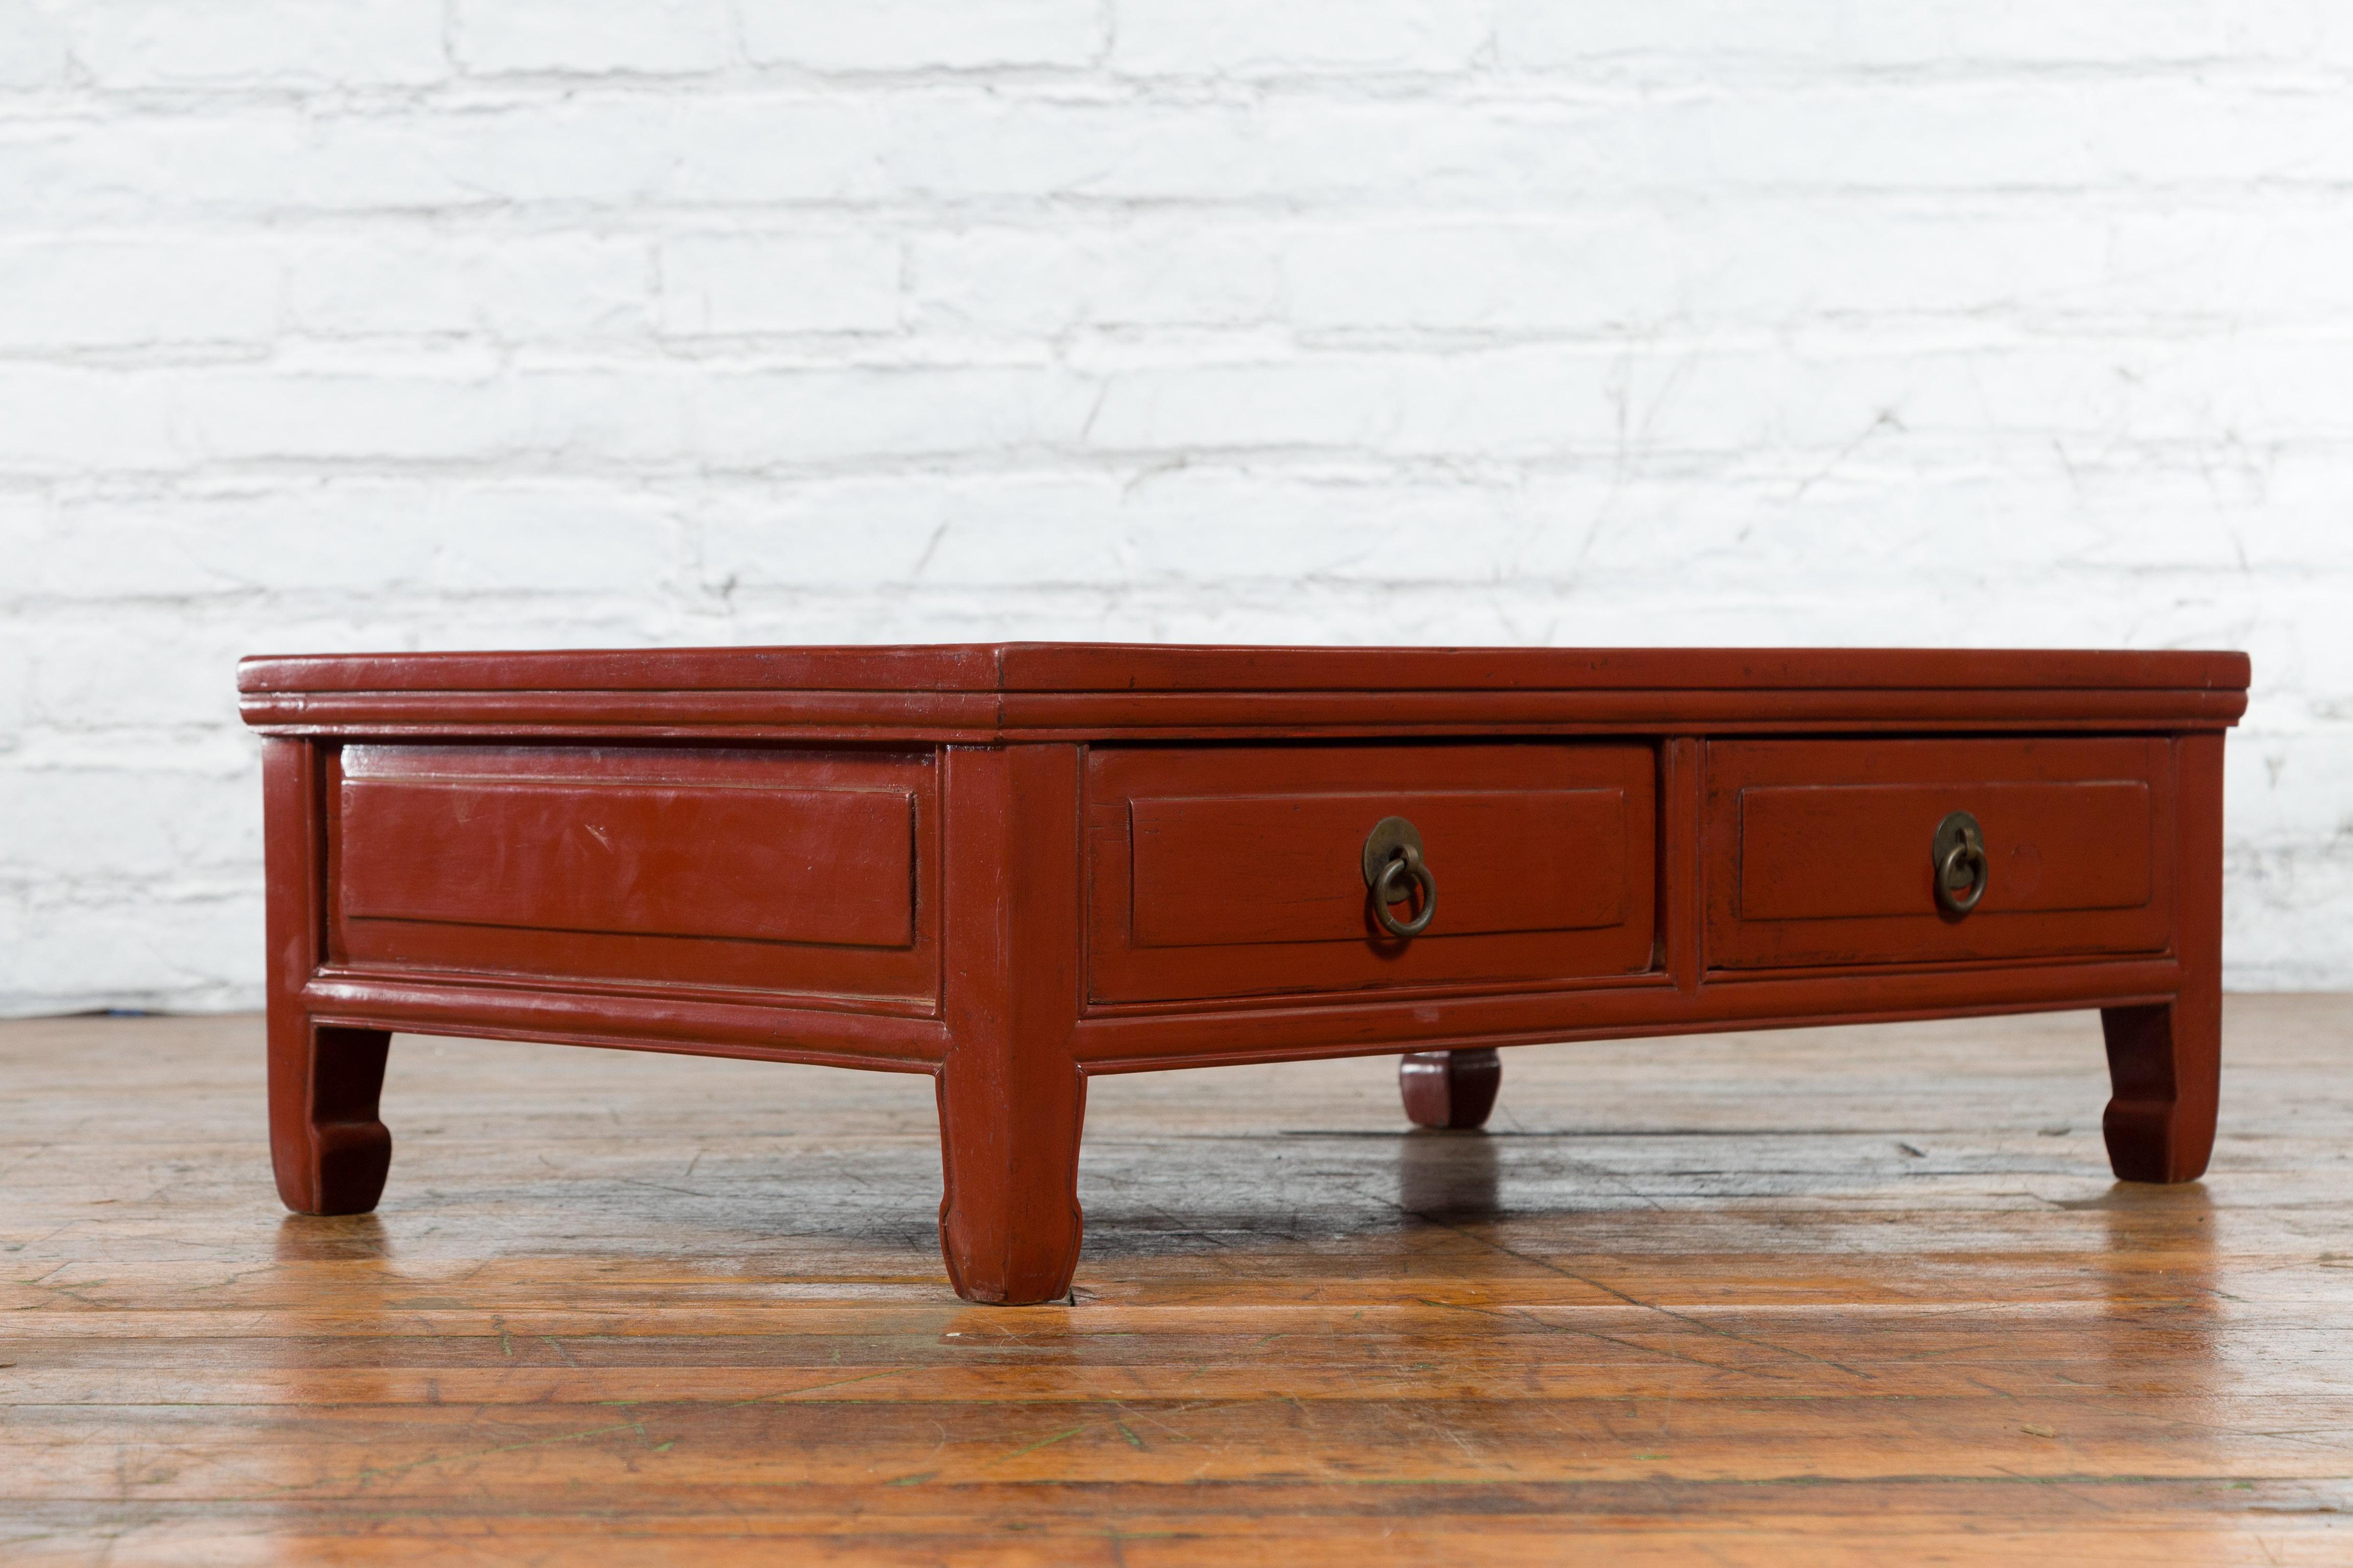 Qing Dynasty Red Lacquer Low Kang Coffee Table with Drawers and Horse Hoof Feet For Sale 2